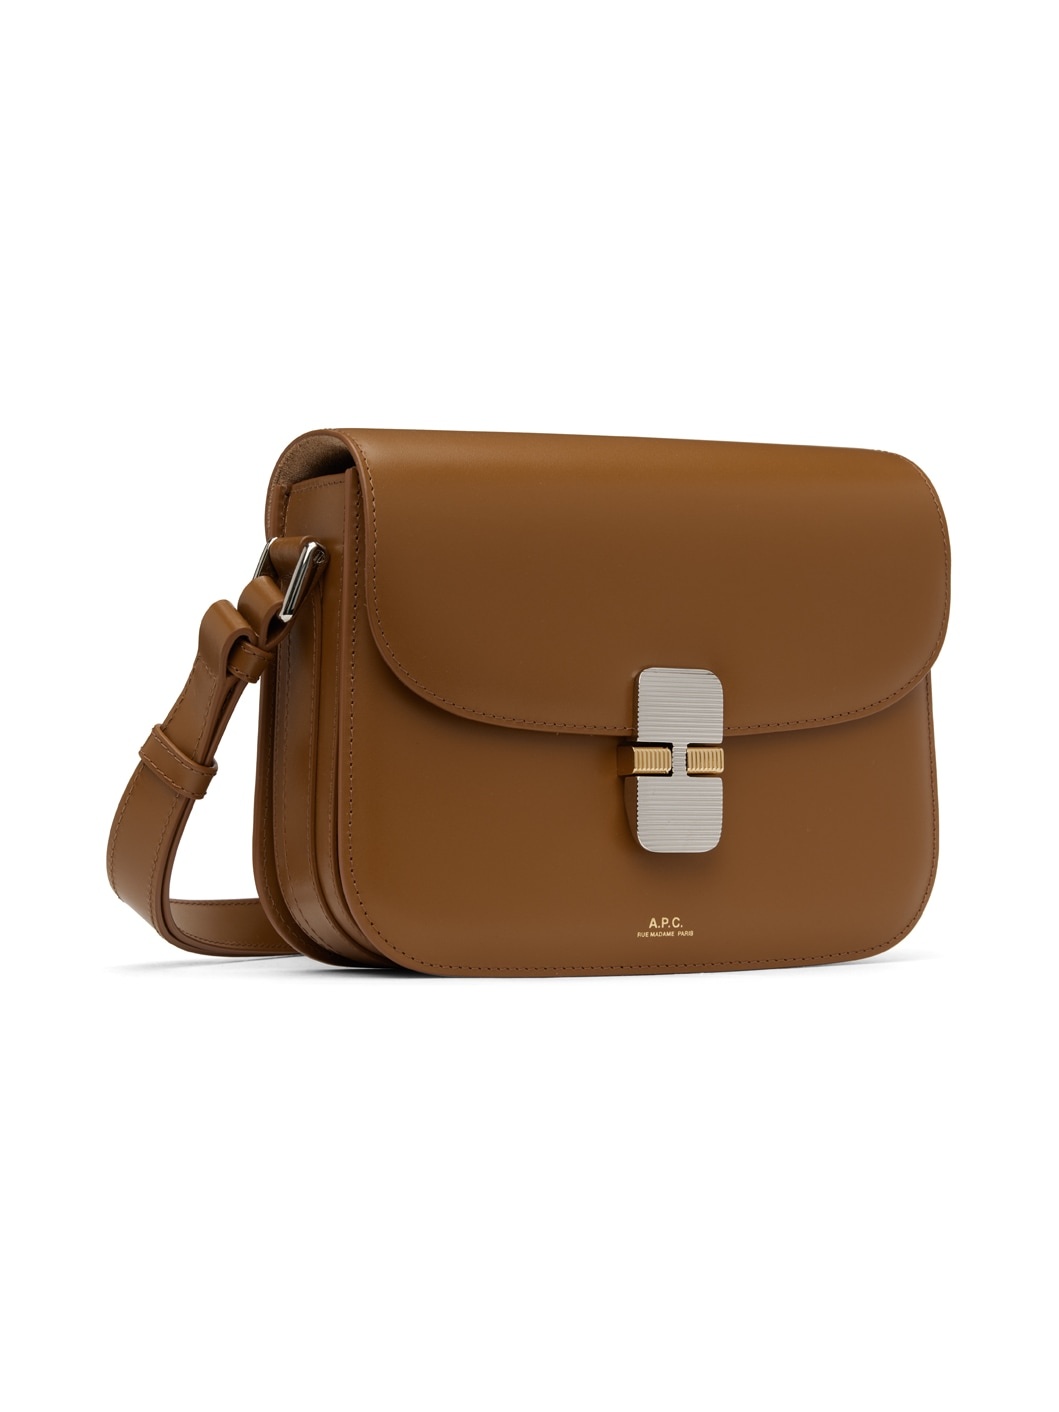 A.P.C. Small Grace Bag in Brown